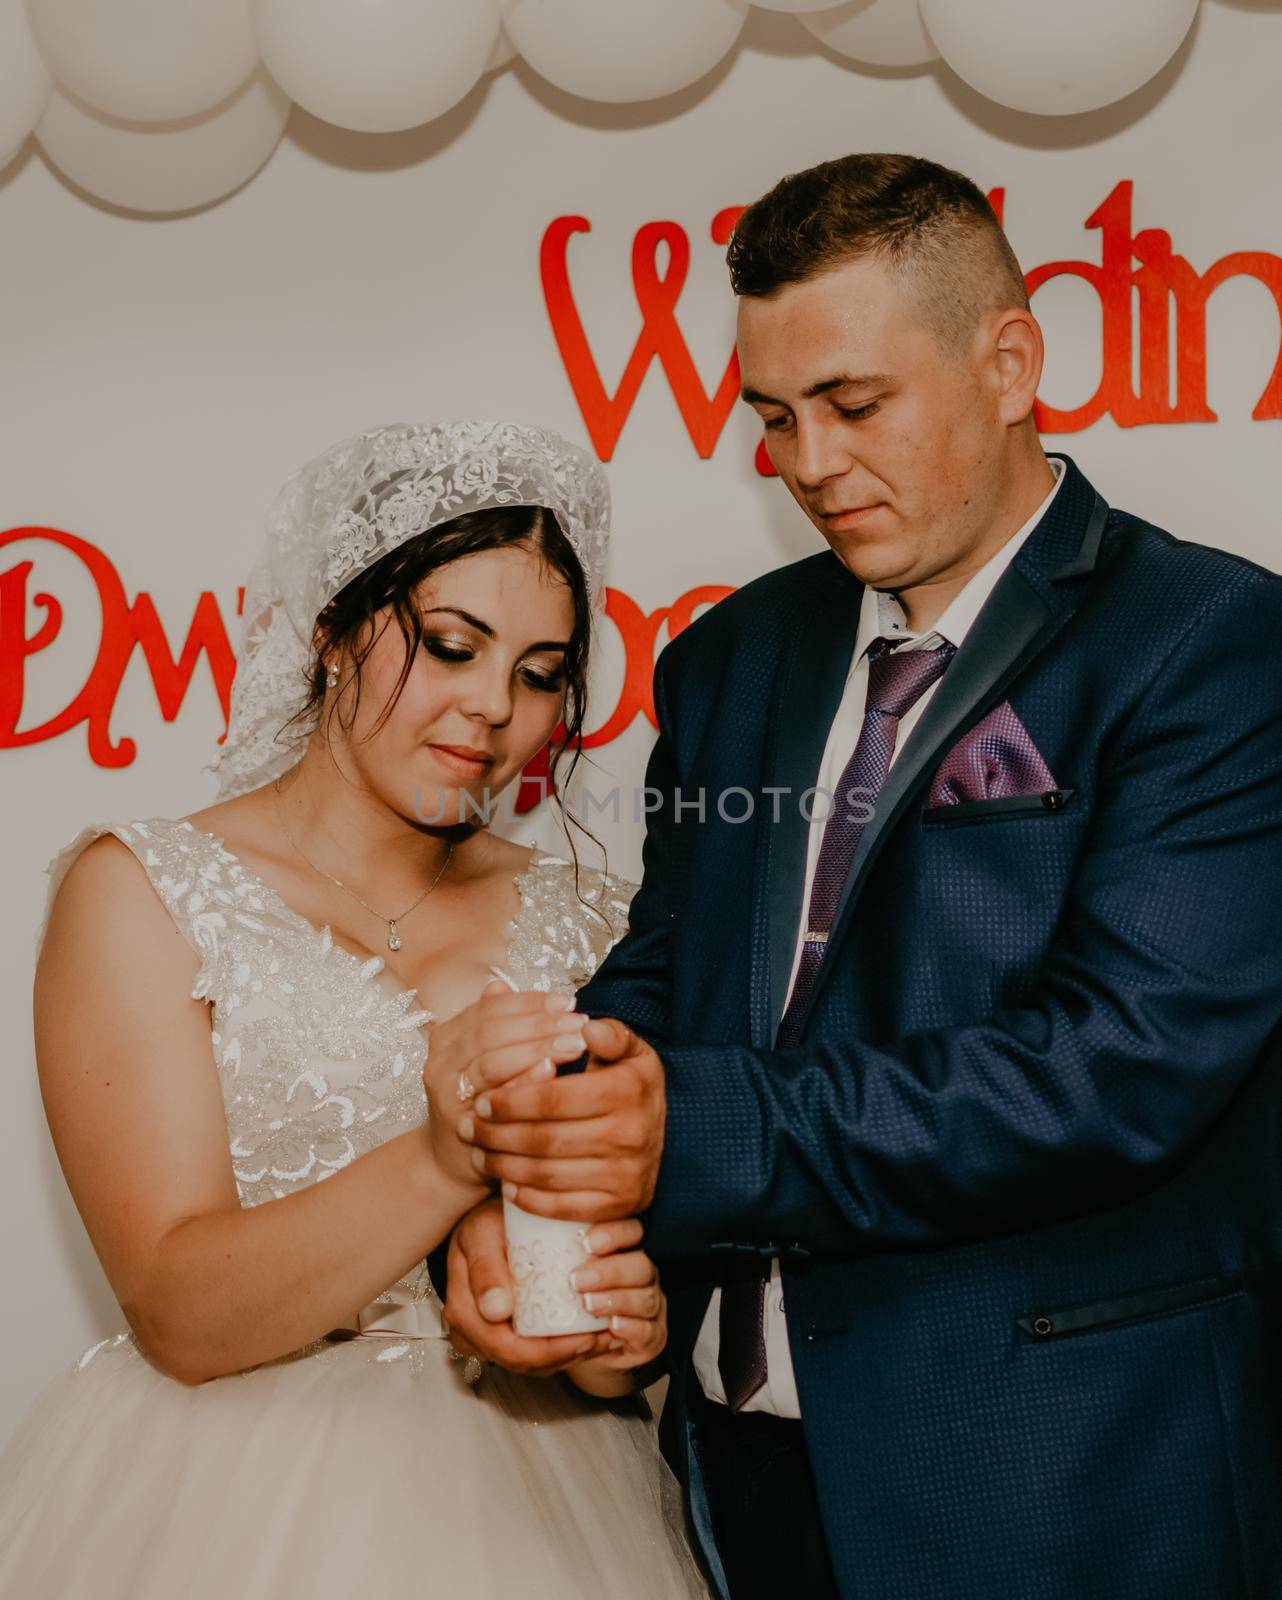 groom and the bride shawl are holding together in their hands a lighted candle, which symbolizes the family hearth. Slavic Ukrainian Russian wedding traditions